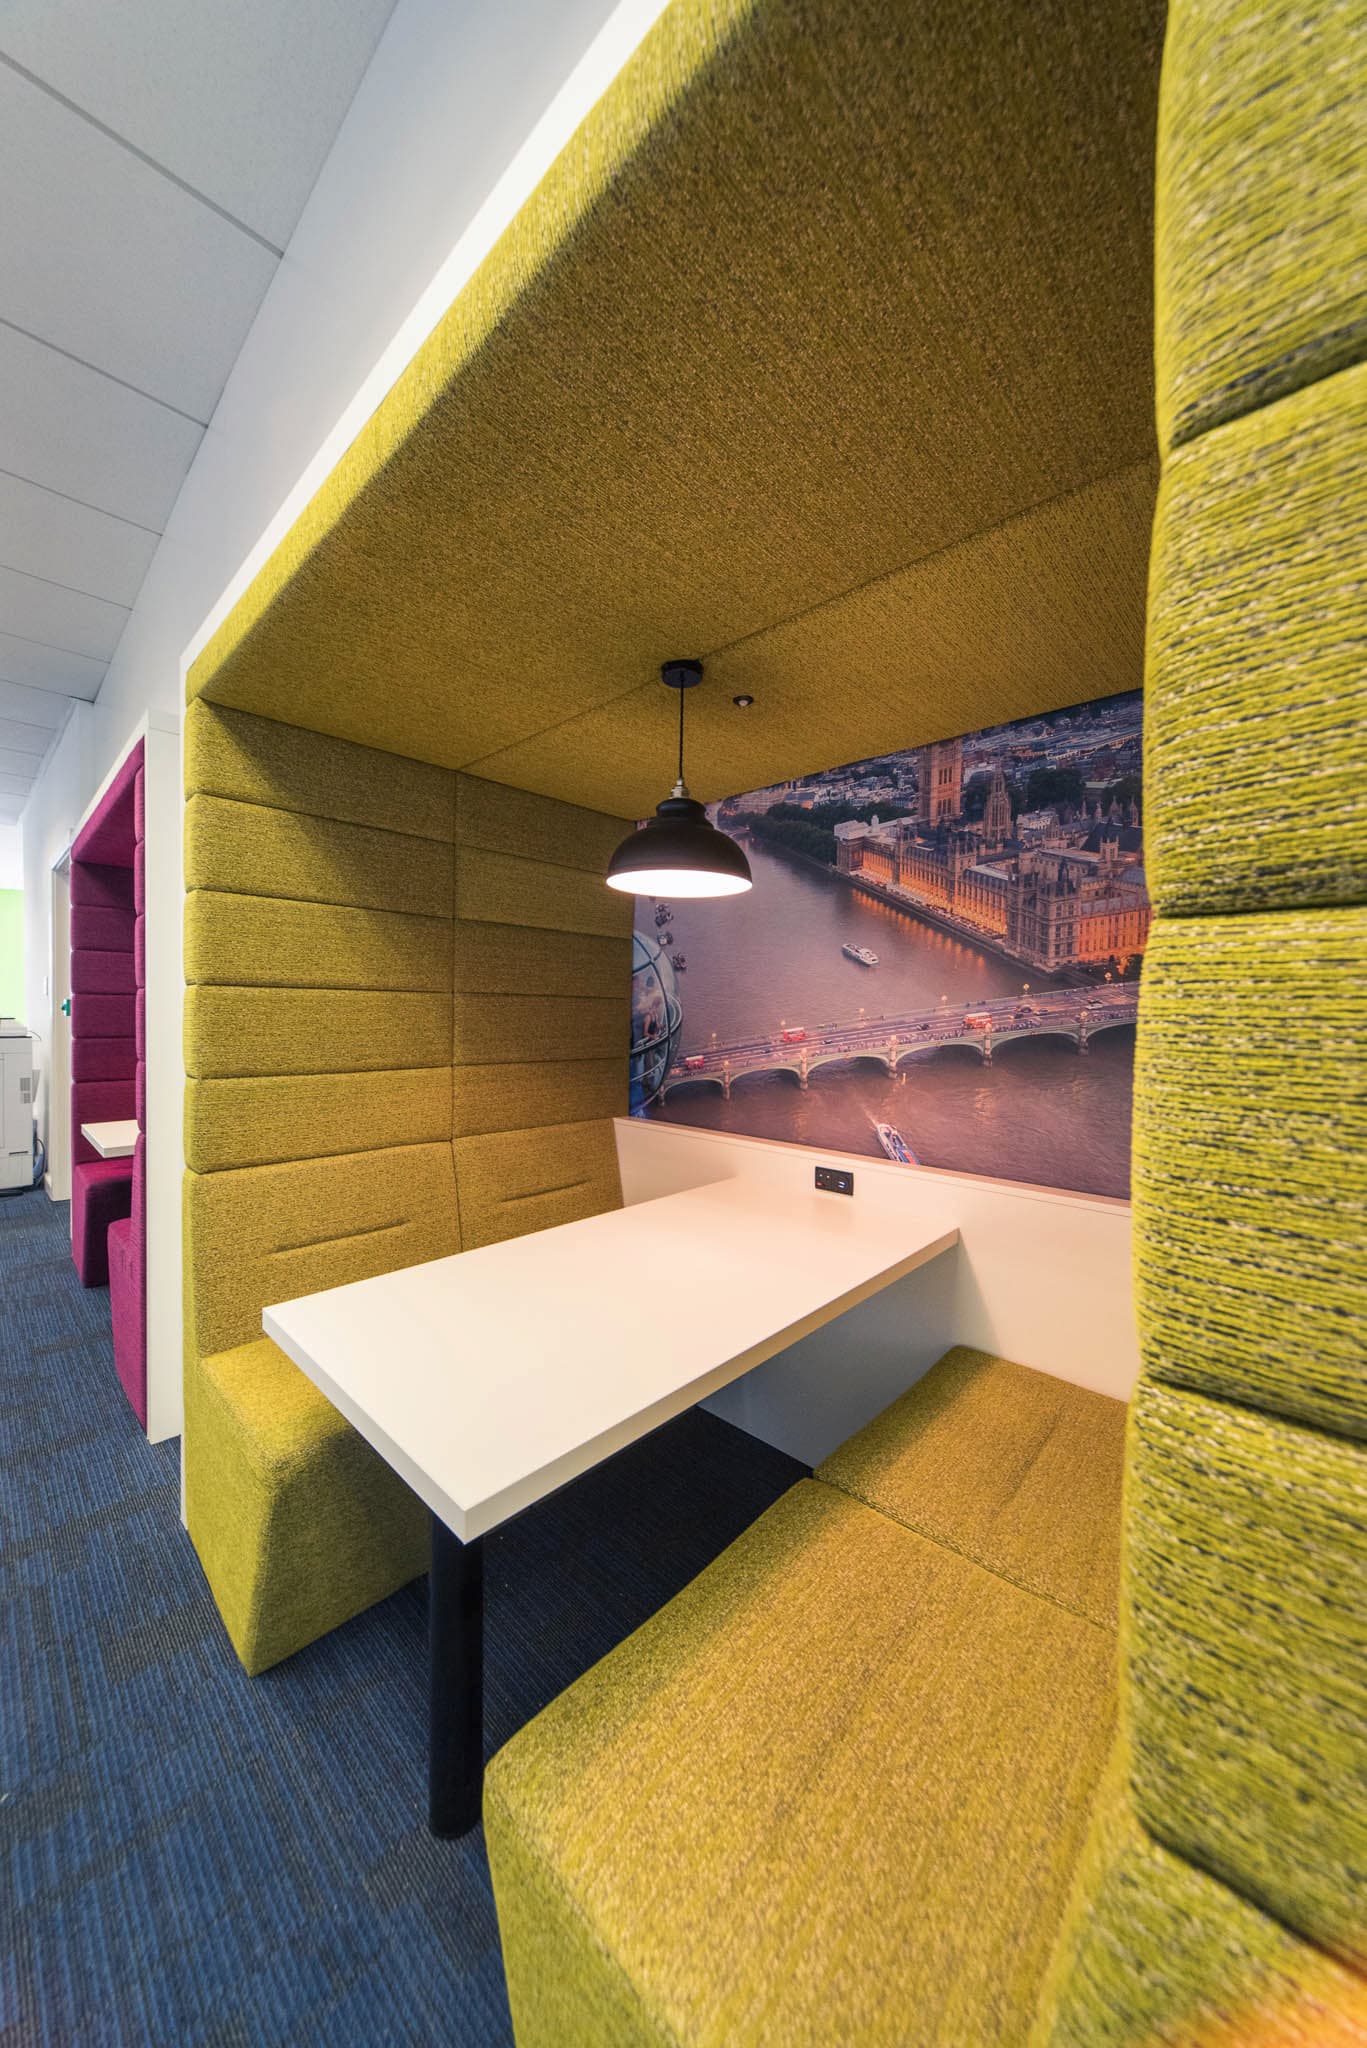 How global office design trends adapt themselves to local needs